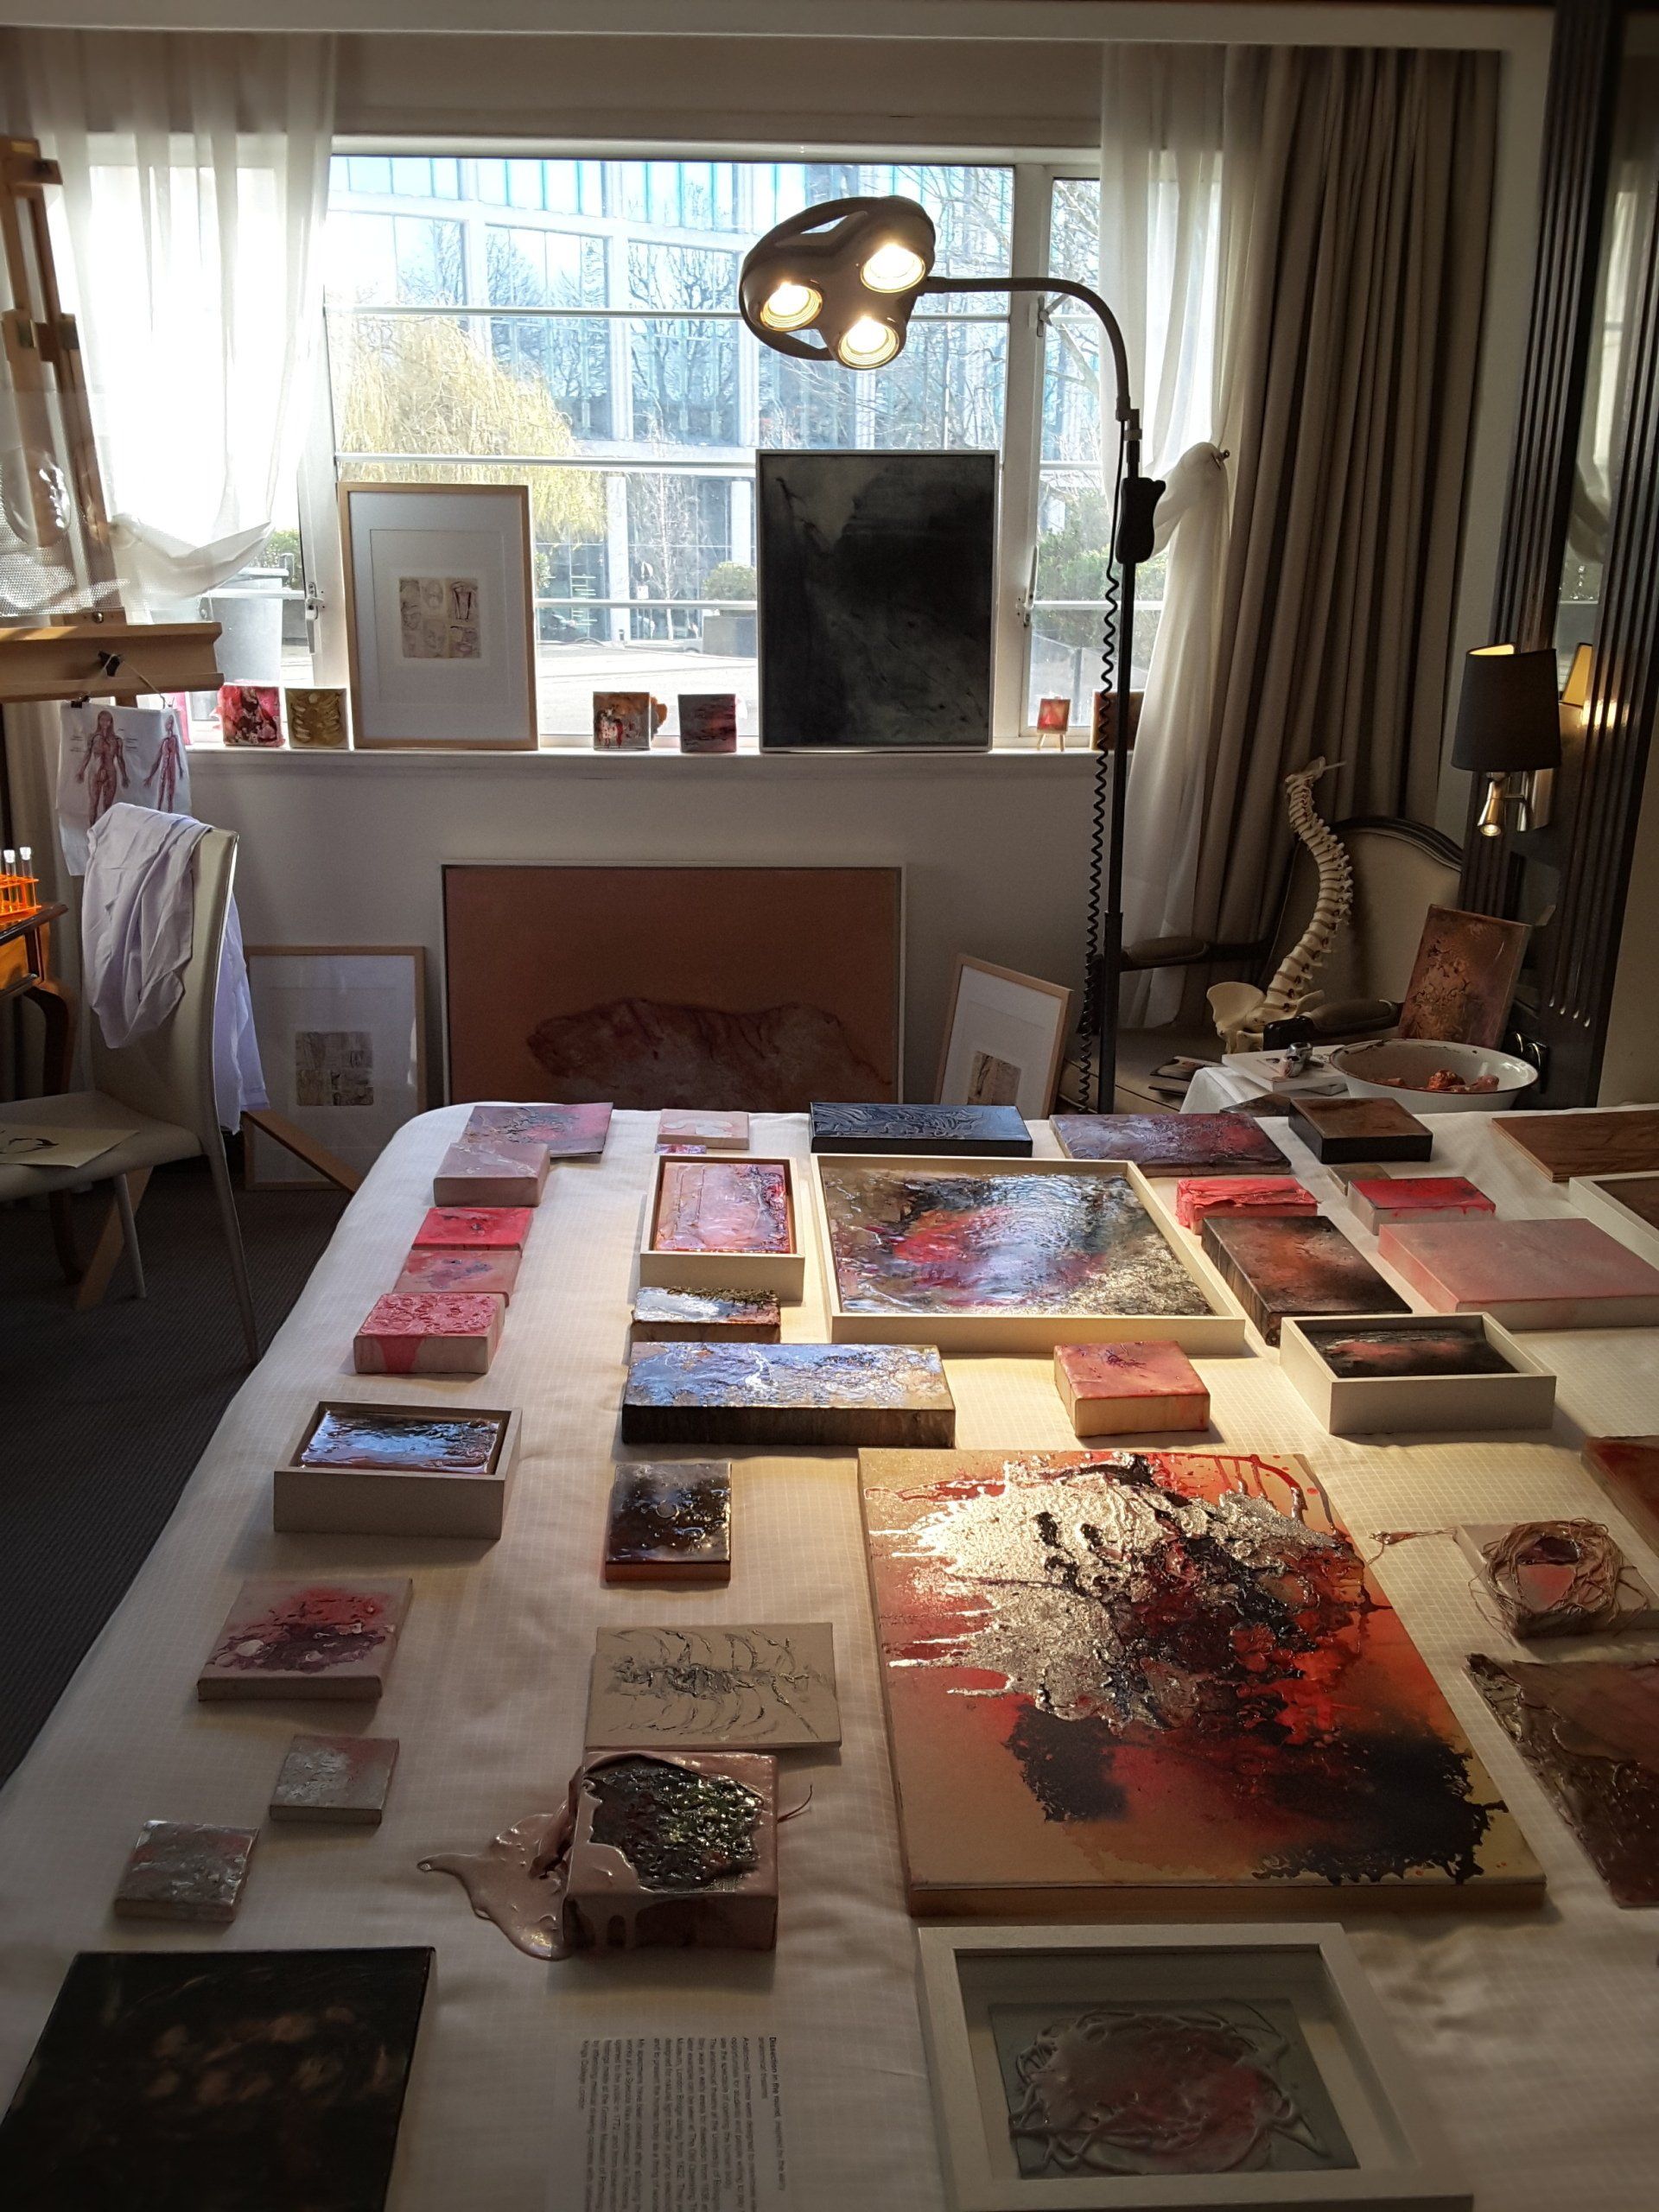 Hotel bed transformed into canvas to display artworks created from studying pathology specimens.